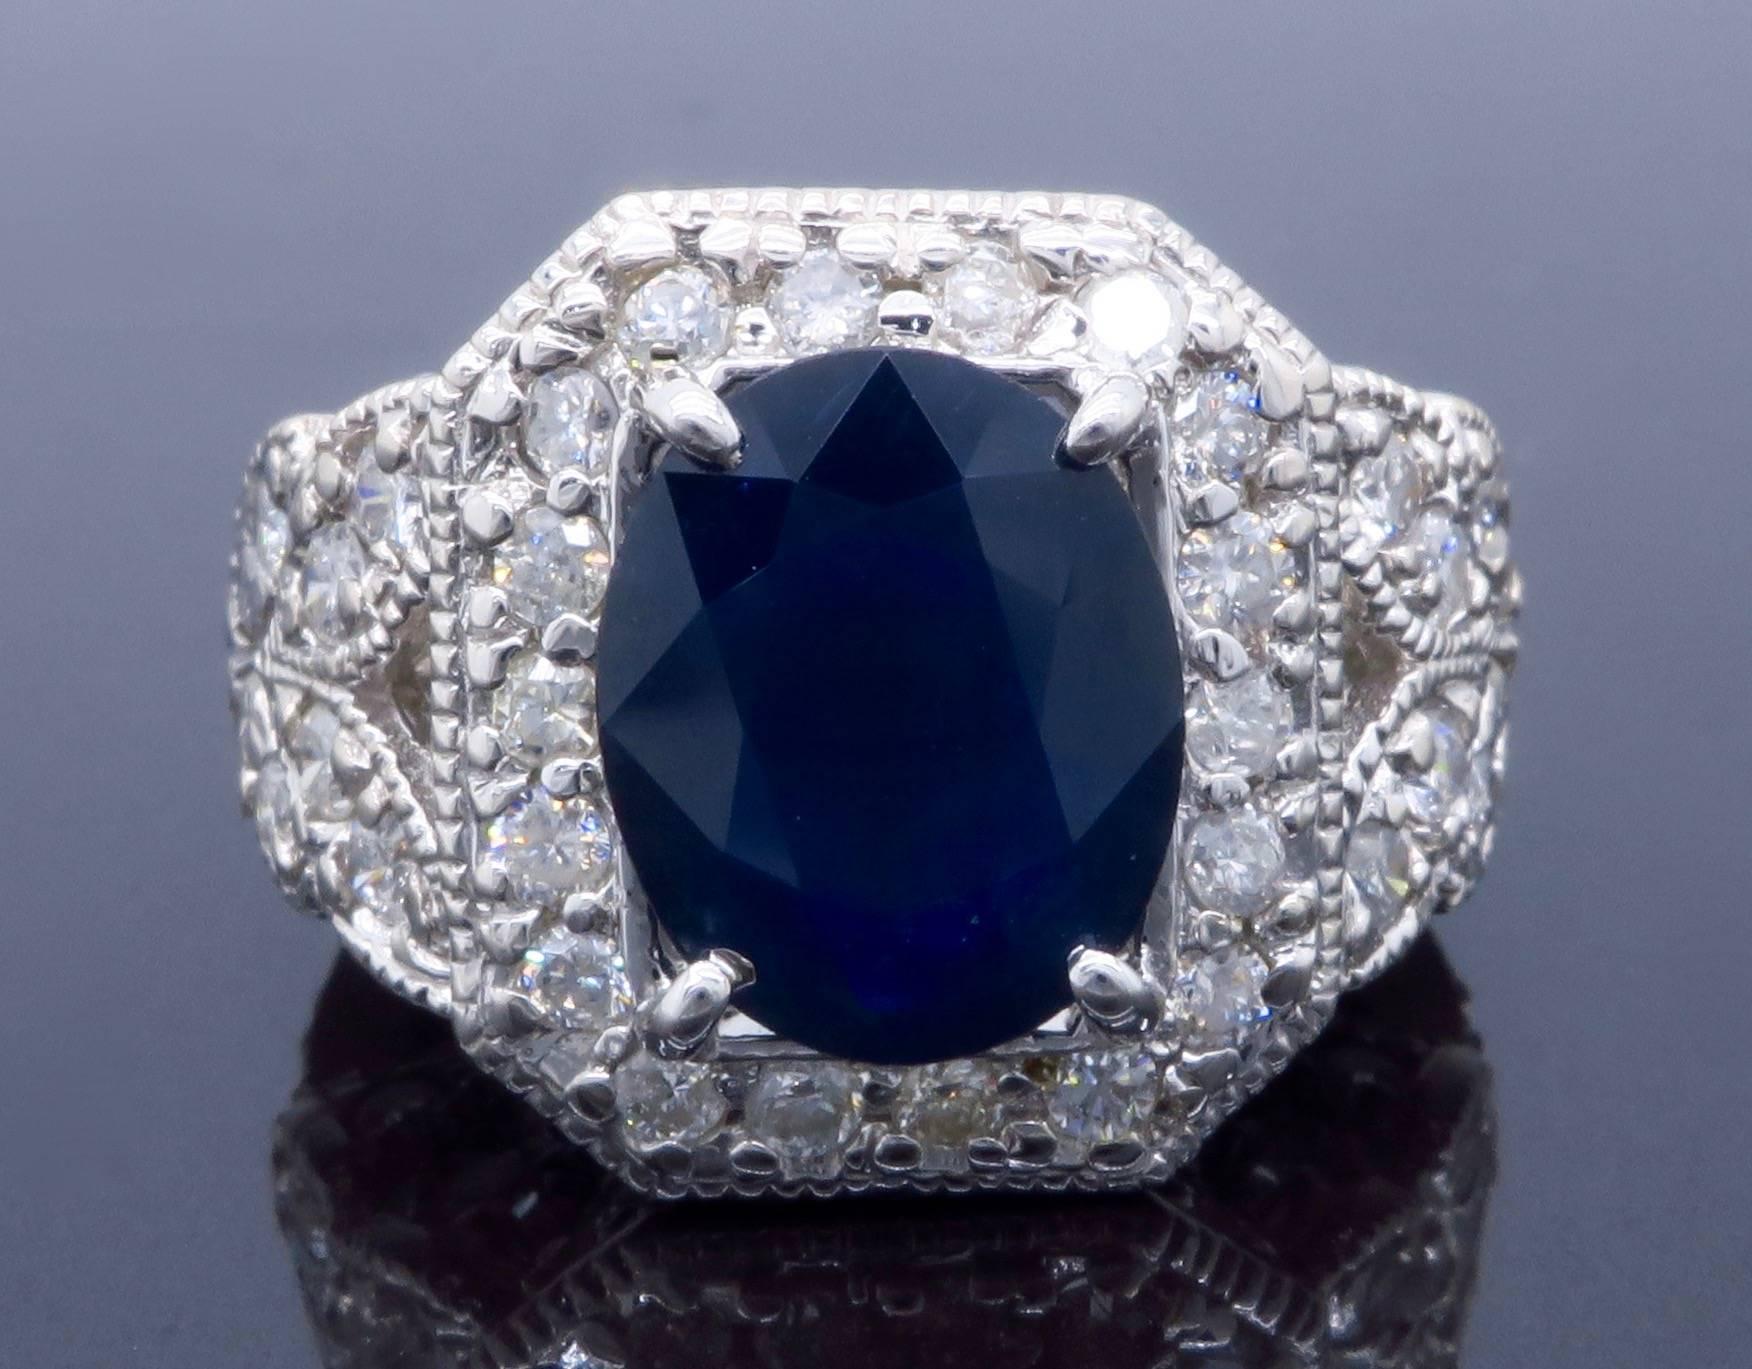 Vintage inspired ring features an approximate 11.80x9.42mm Oval Cut Blue Sapphire. The beautiful 14K white gold ring is adorned with approximately 1.86CTW of Round Brilliant Cut Diamonds. Currently the ring is a size 6.25 and weighs 11.7 grams. The